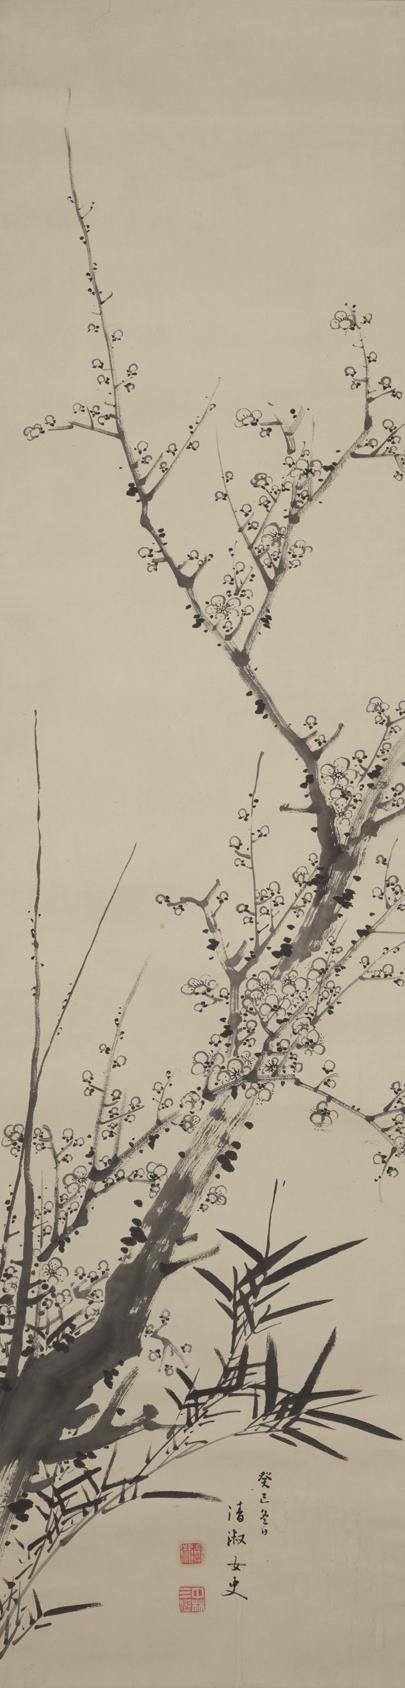 Hanging scroll depiciting an ink drawing of a bamboo tree and its branches